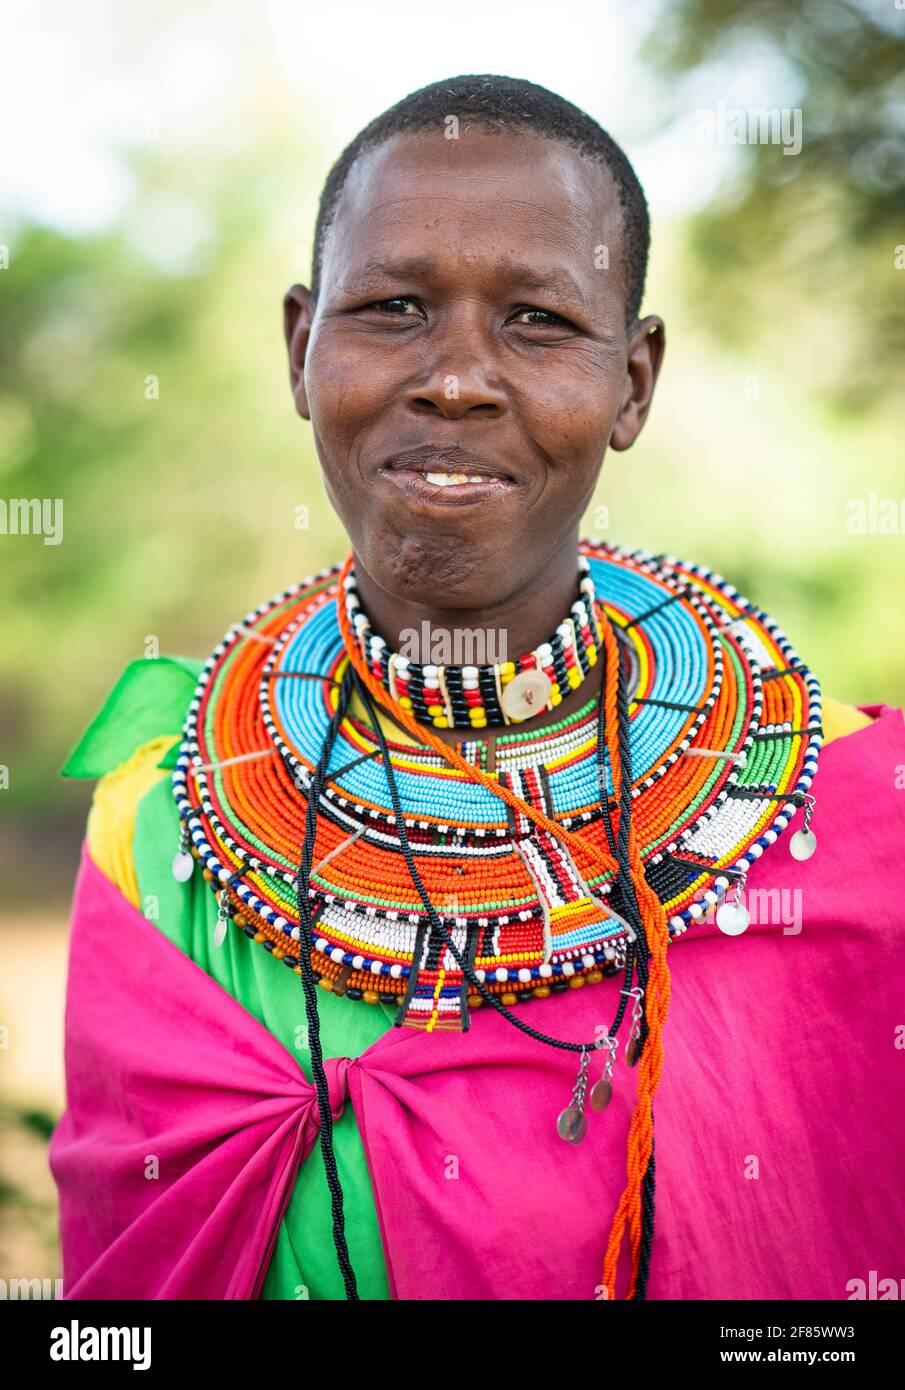 traditional African Maasai woman wearing beaded necklace and colorful shuka cloth Stock Photo